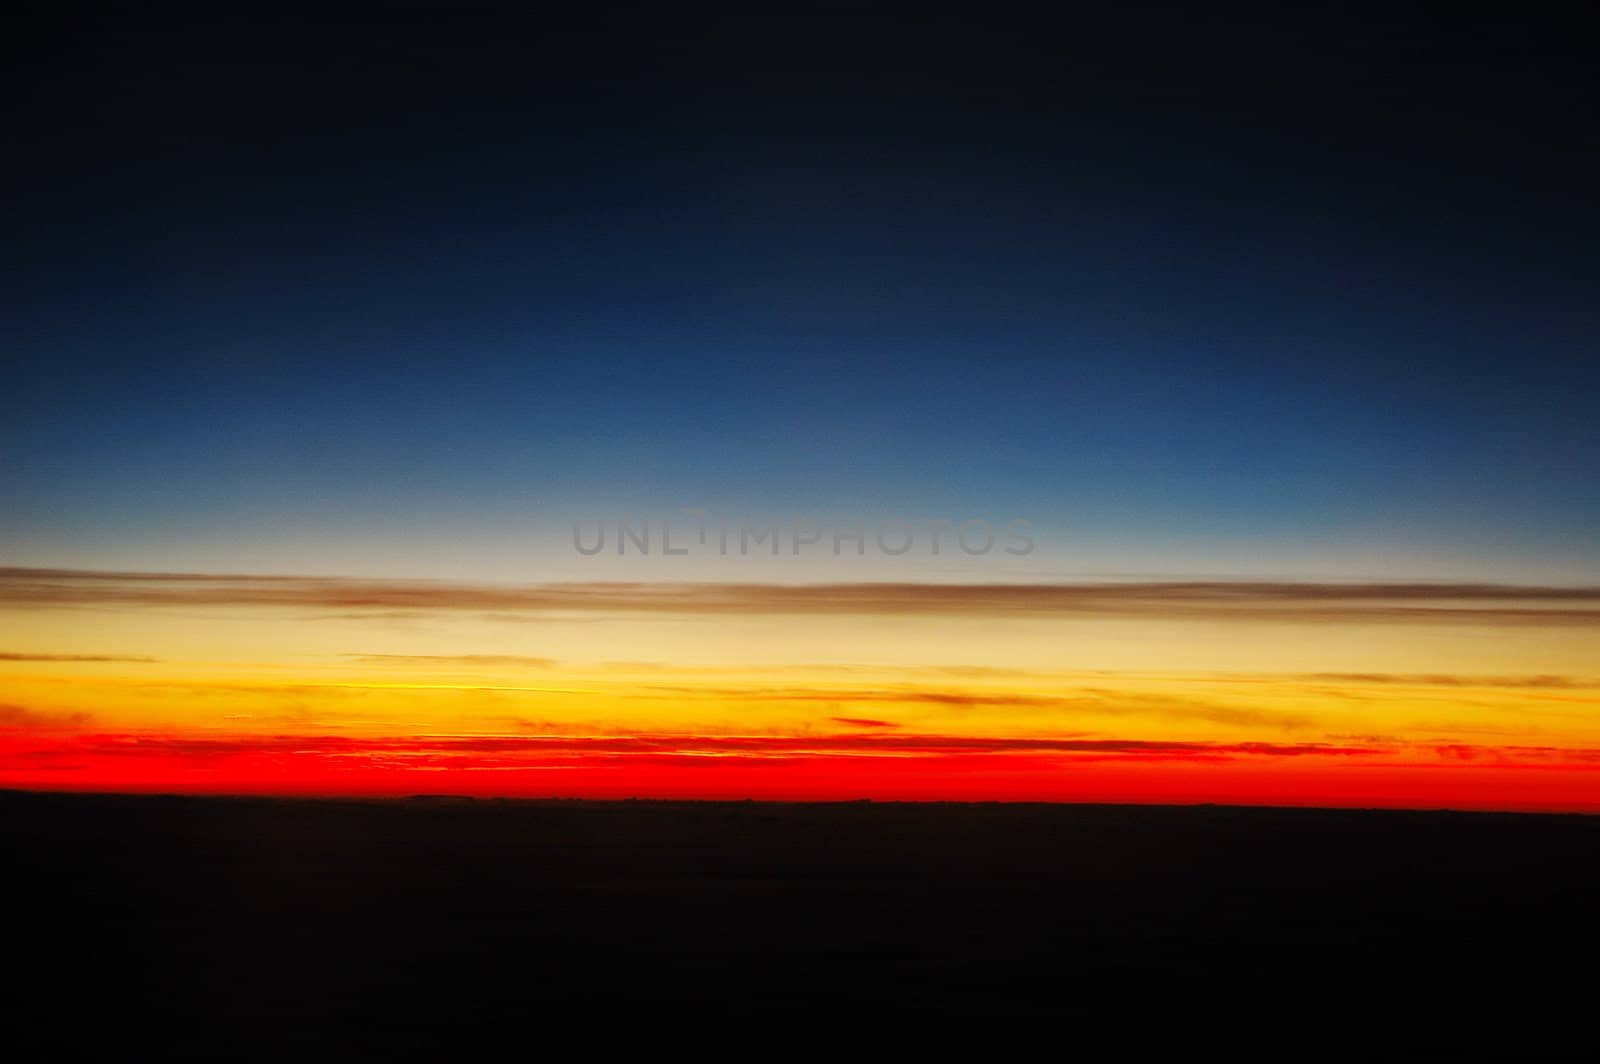 beautiful and corourful sunset above clouds, shot taken from plane